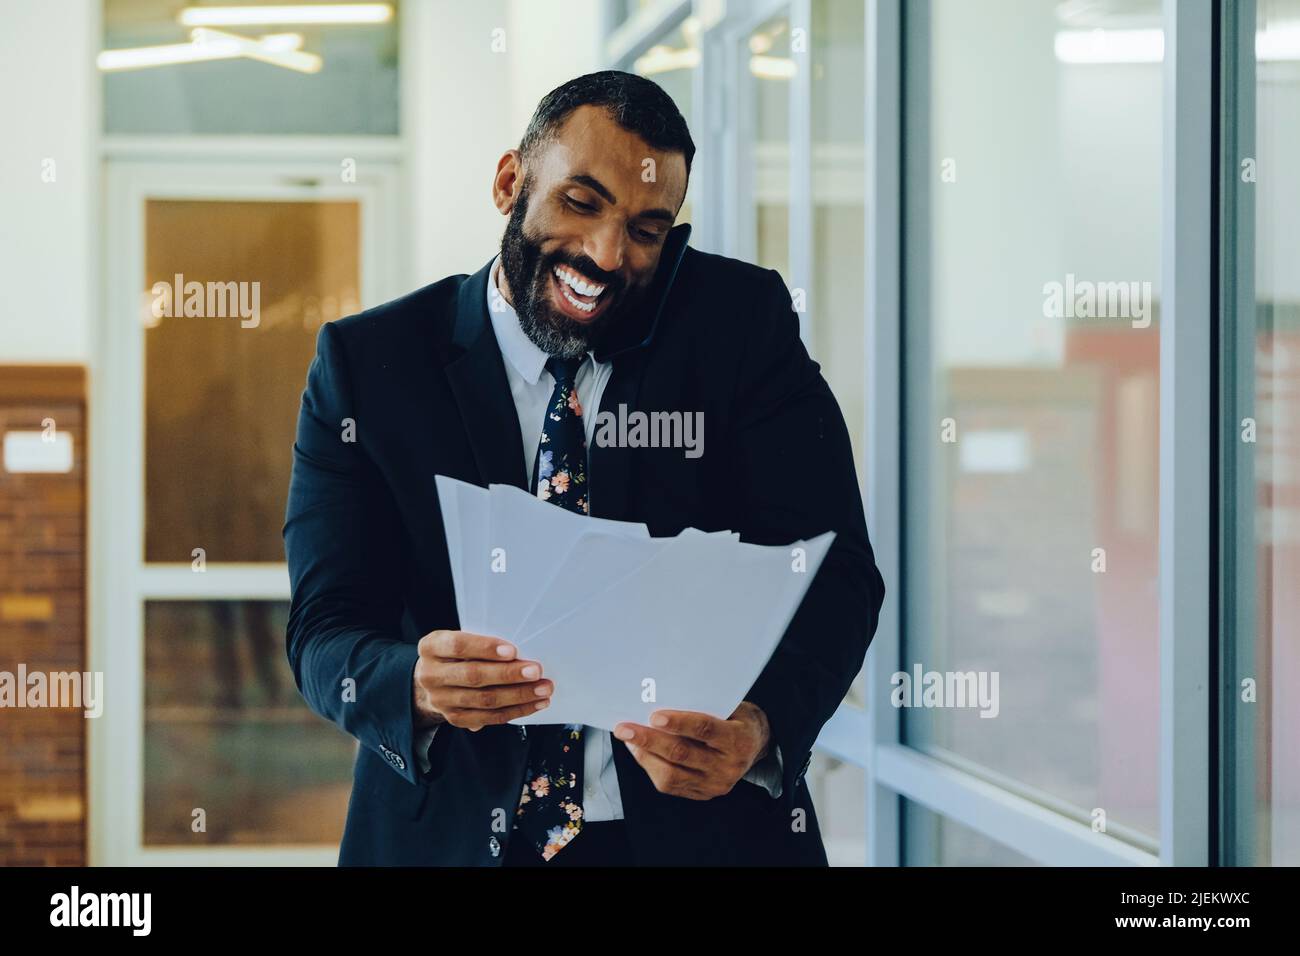 Mid adult bearded black man Entrepreneur Businessman wearing suit holding papers and talking on smartphone laughing walking in office shot Stock Photo